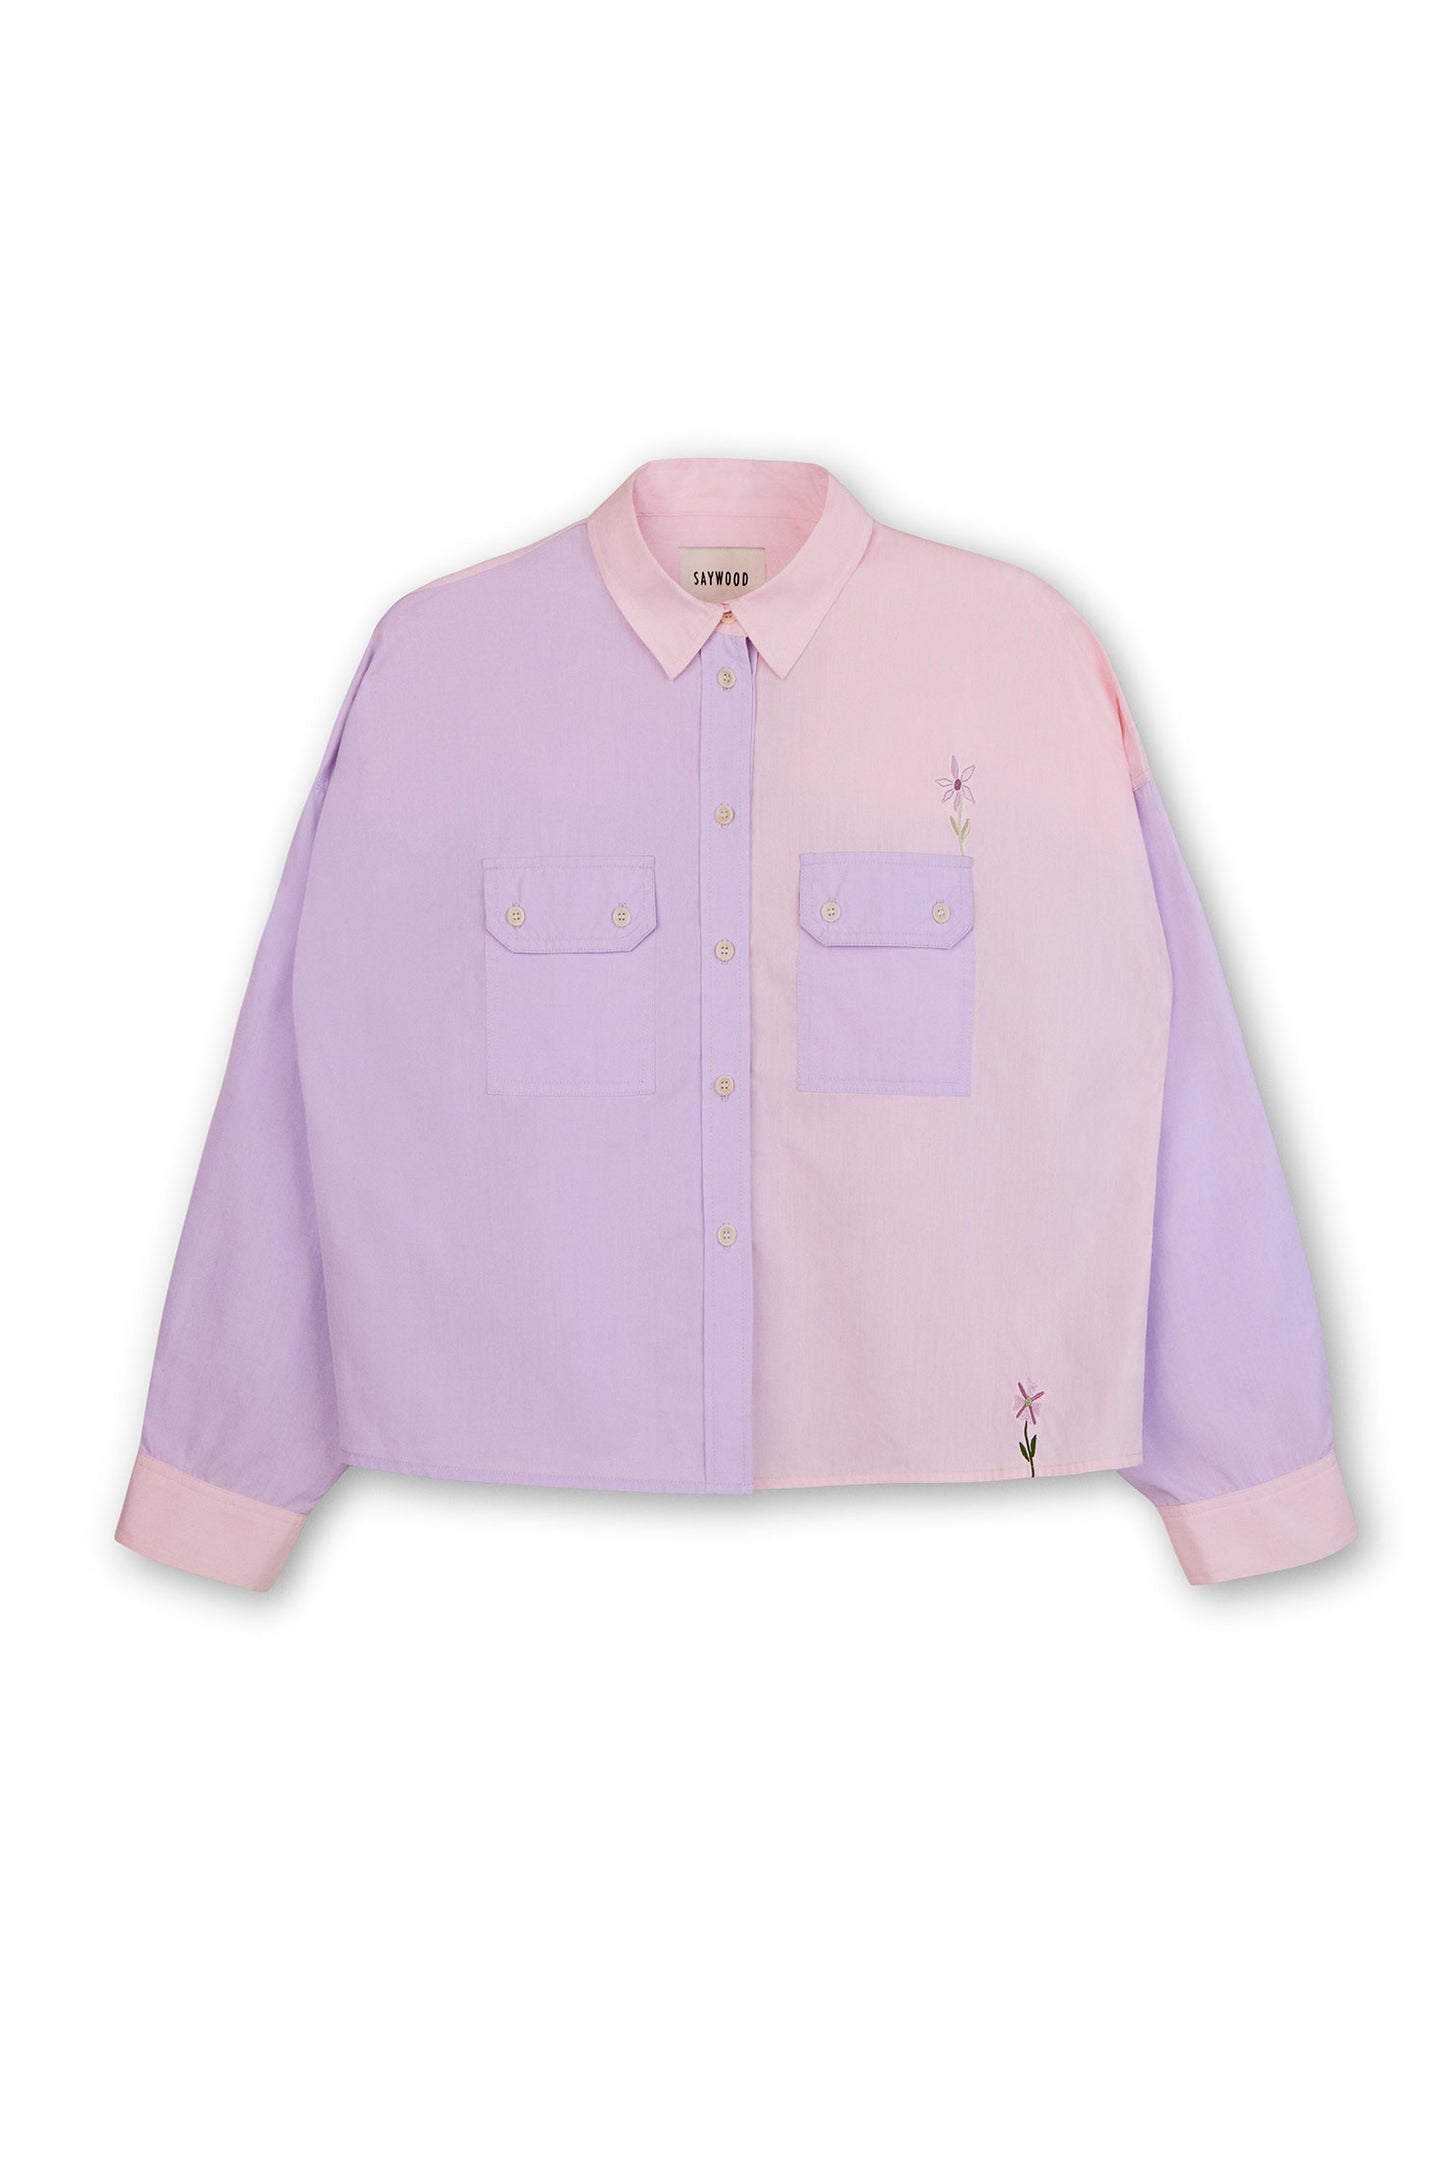 Colourblocked pink and lilac shirt with a boxy silhouette. Jules Shirt from Saywood with embroidered flower detail and utility style pockets.